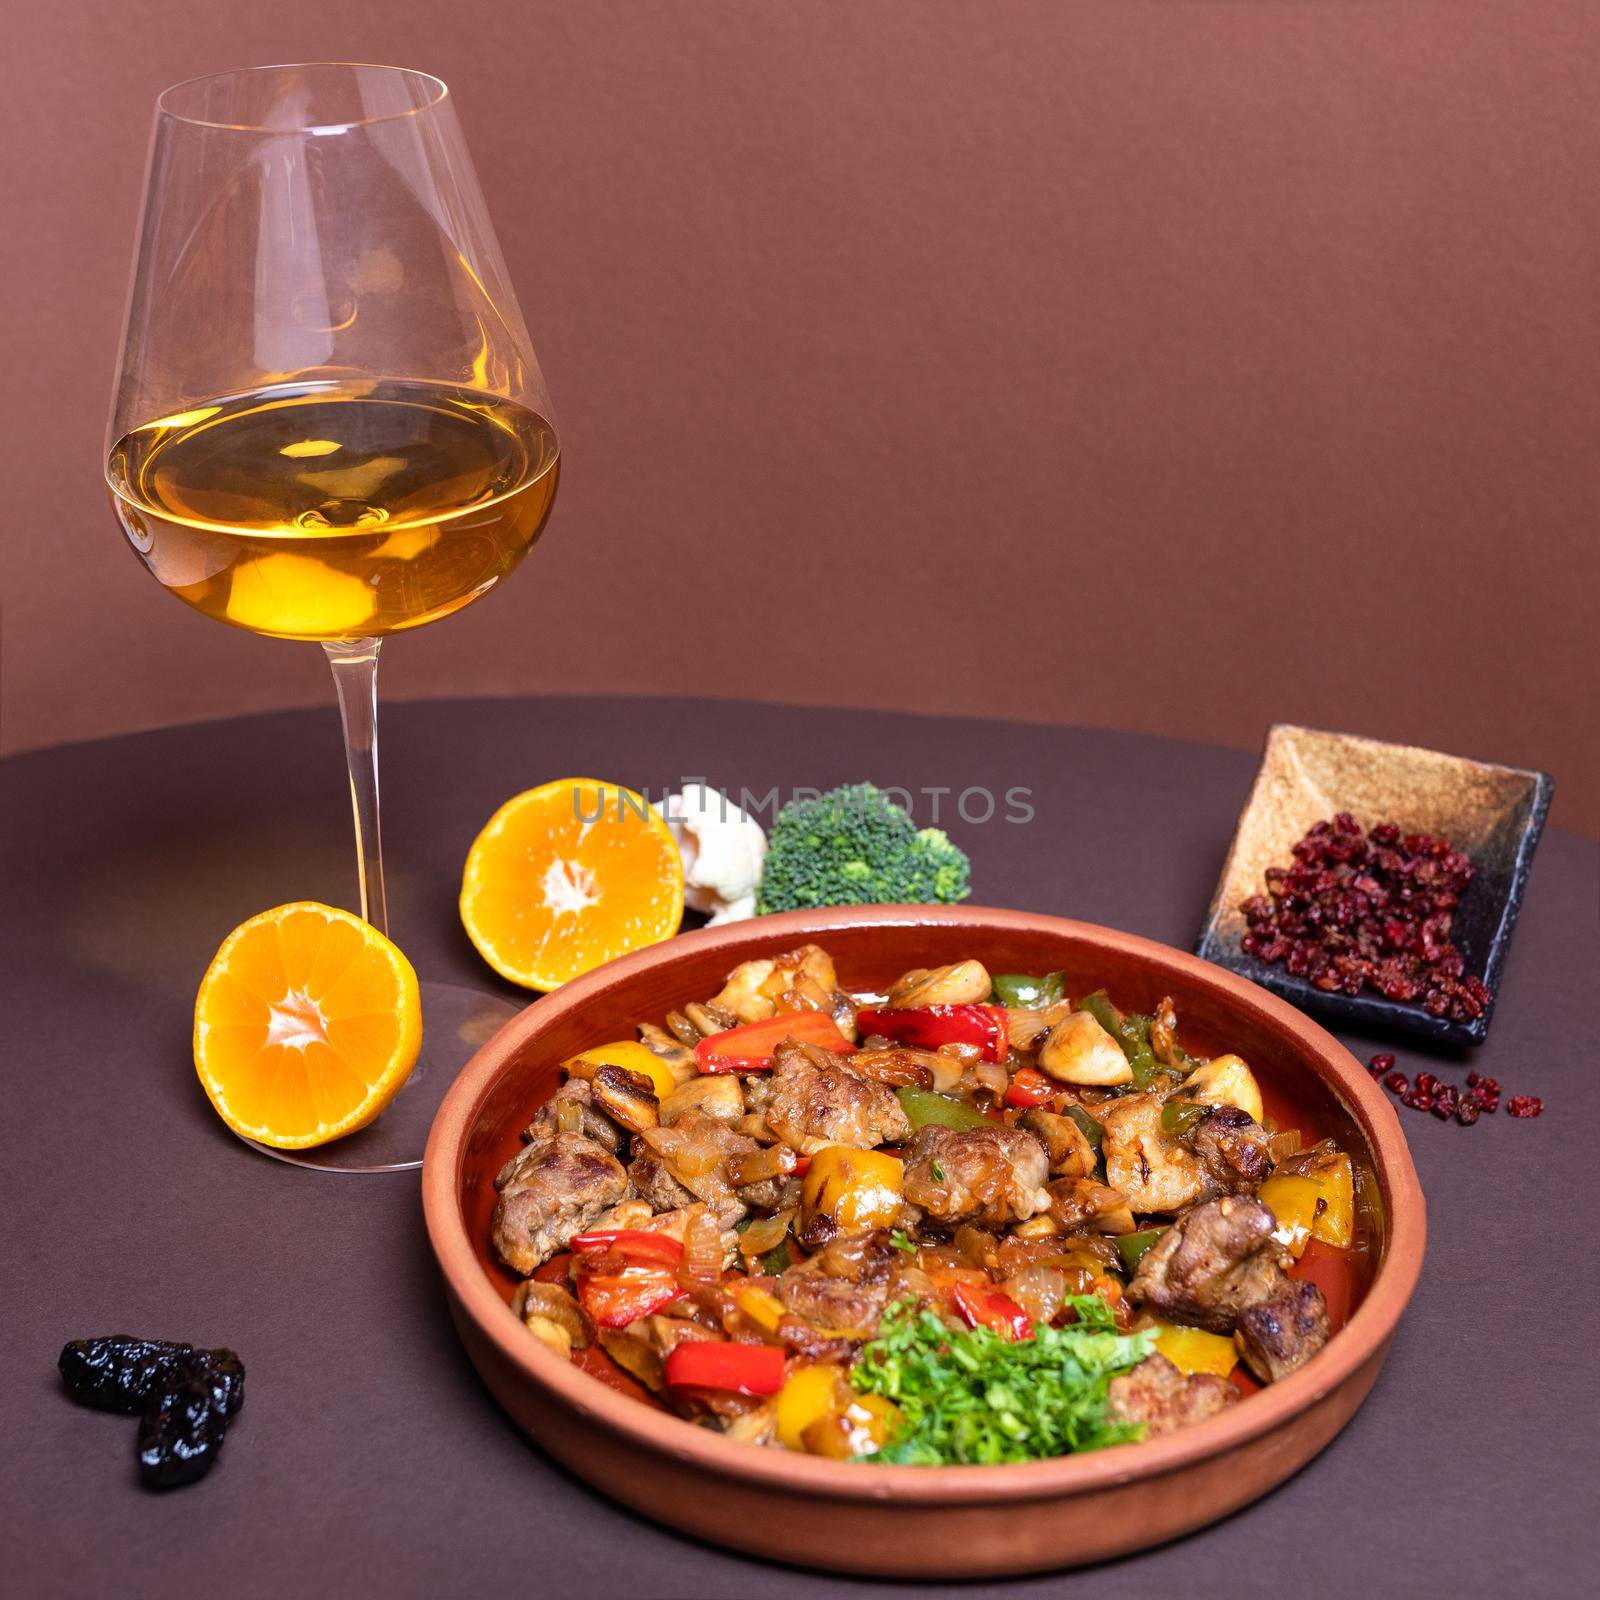 Tasty meat meal with white wine glass by ferhad